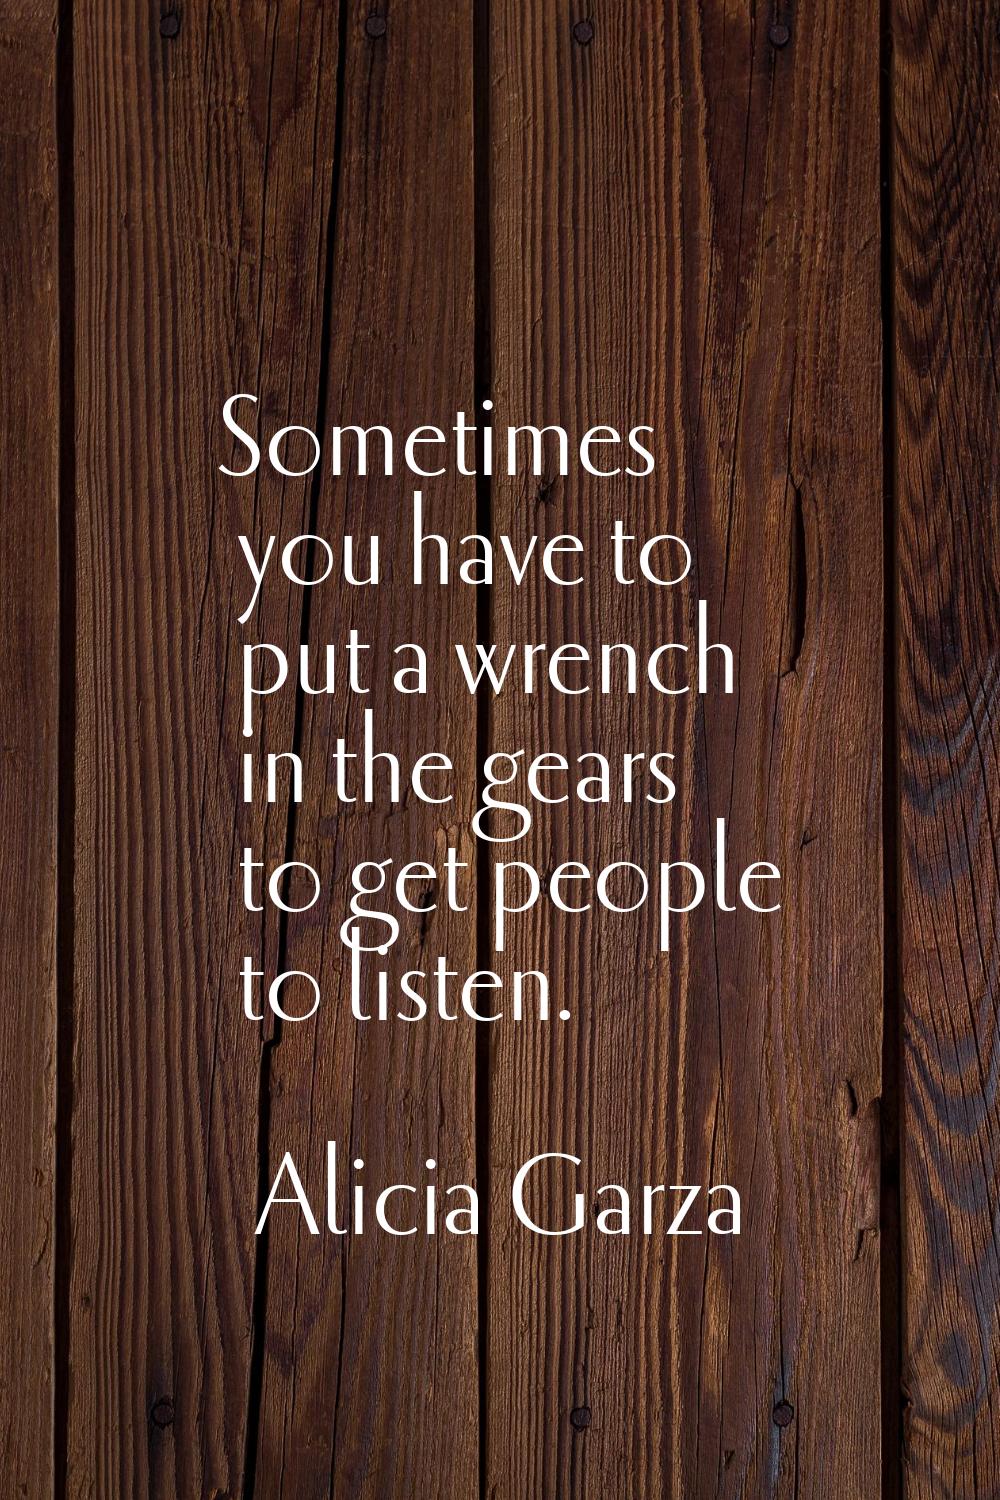 Sometimes you have to put a wrench in the gears to get people to listen.